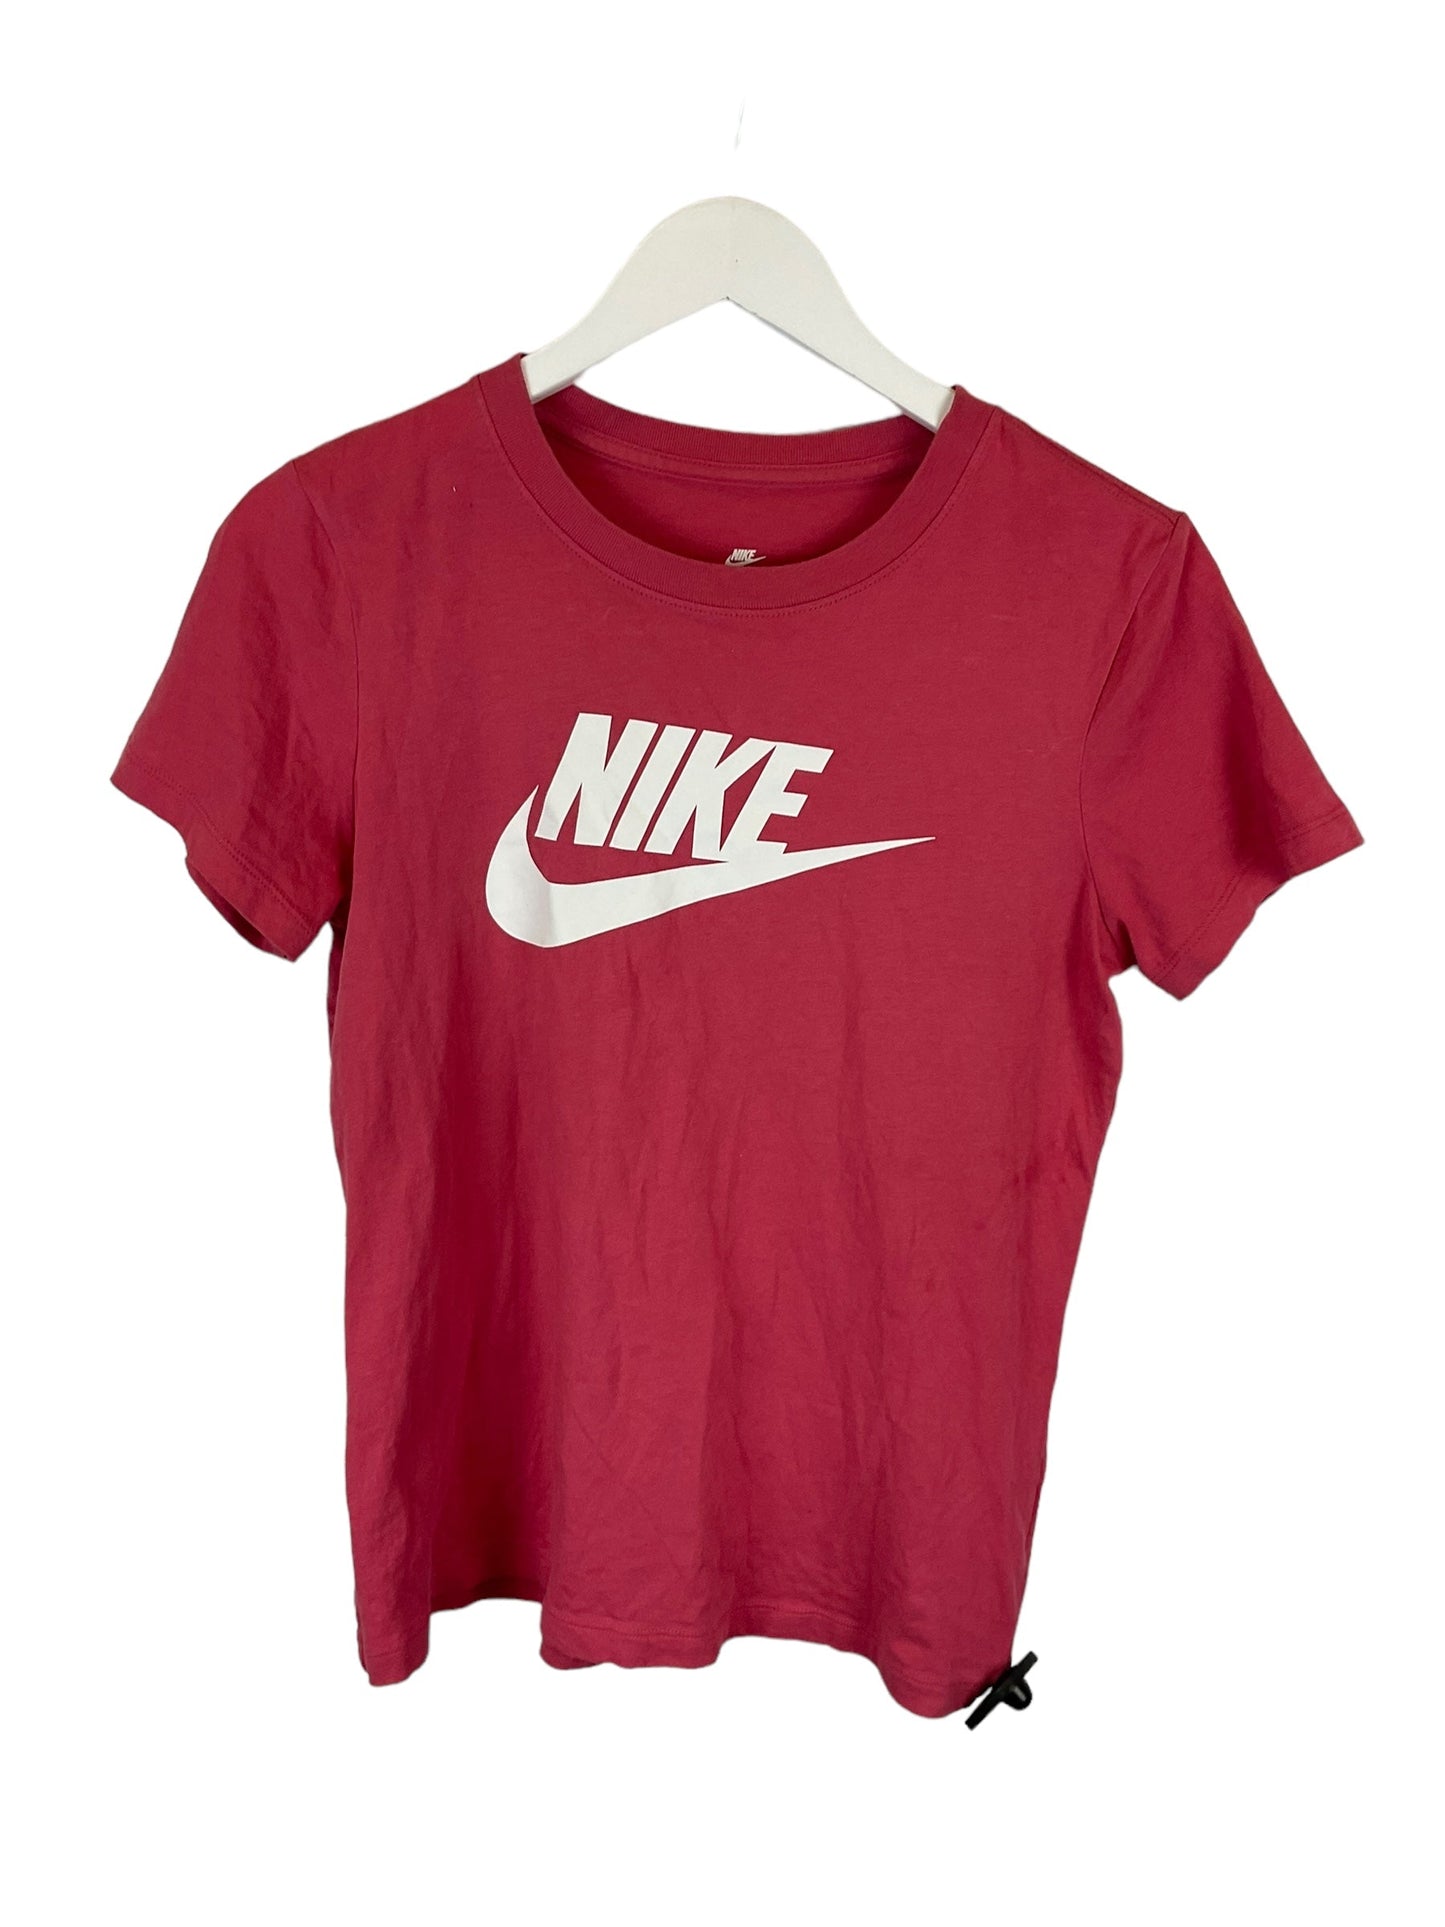 Pink Top Short Sleeve Nike, Size S